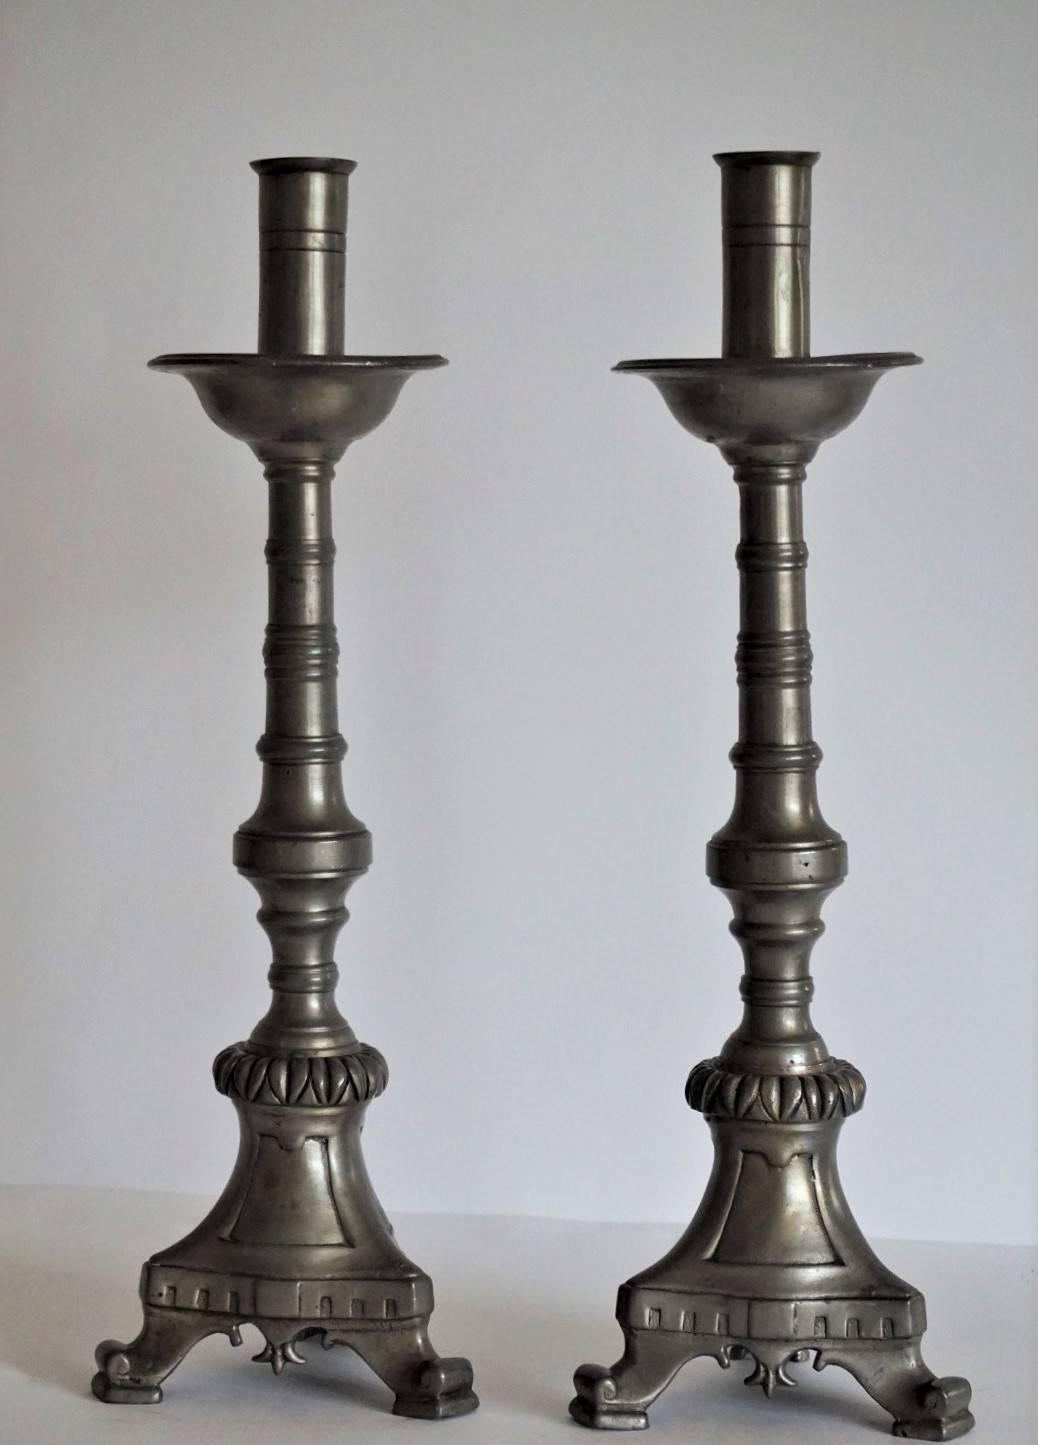 A pair of Scandinavian pewter altar candlesticks of Gothic form, probably Swedish late 19th century. Turned column raised on tripod base, good condition.

Measures: Height 17 in (43 cm)
Width/depth: 4.75 in (12 cm).

